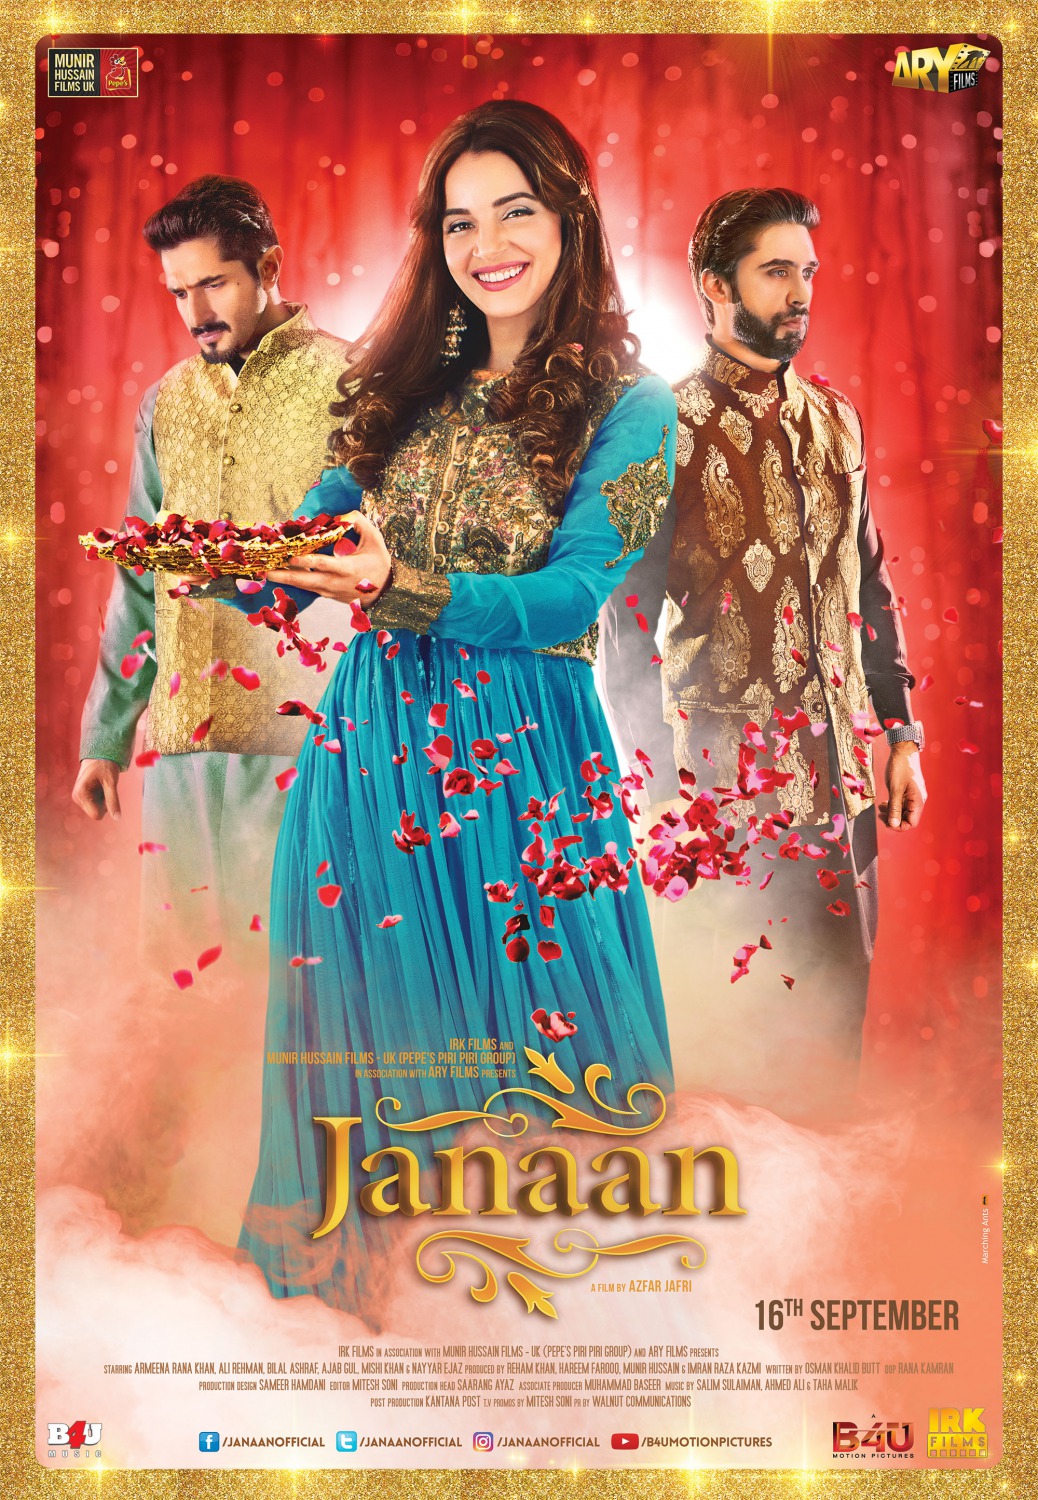 Extra Large Movie Poster Image for Janaan (#2 of 3)